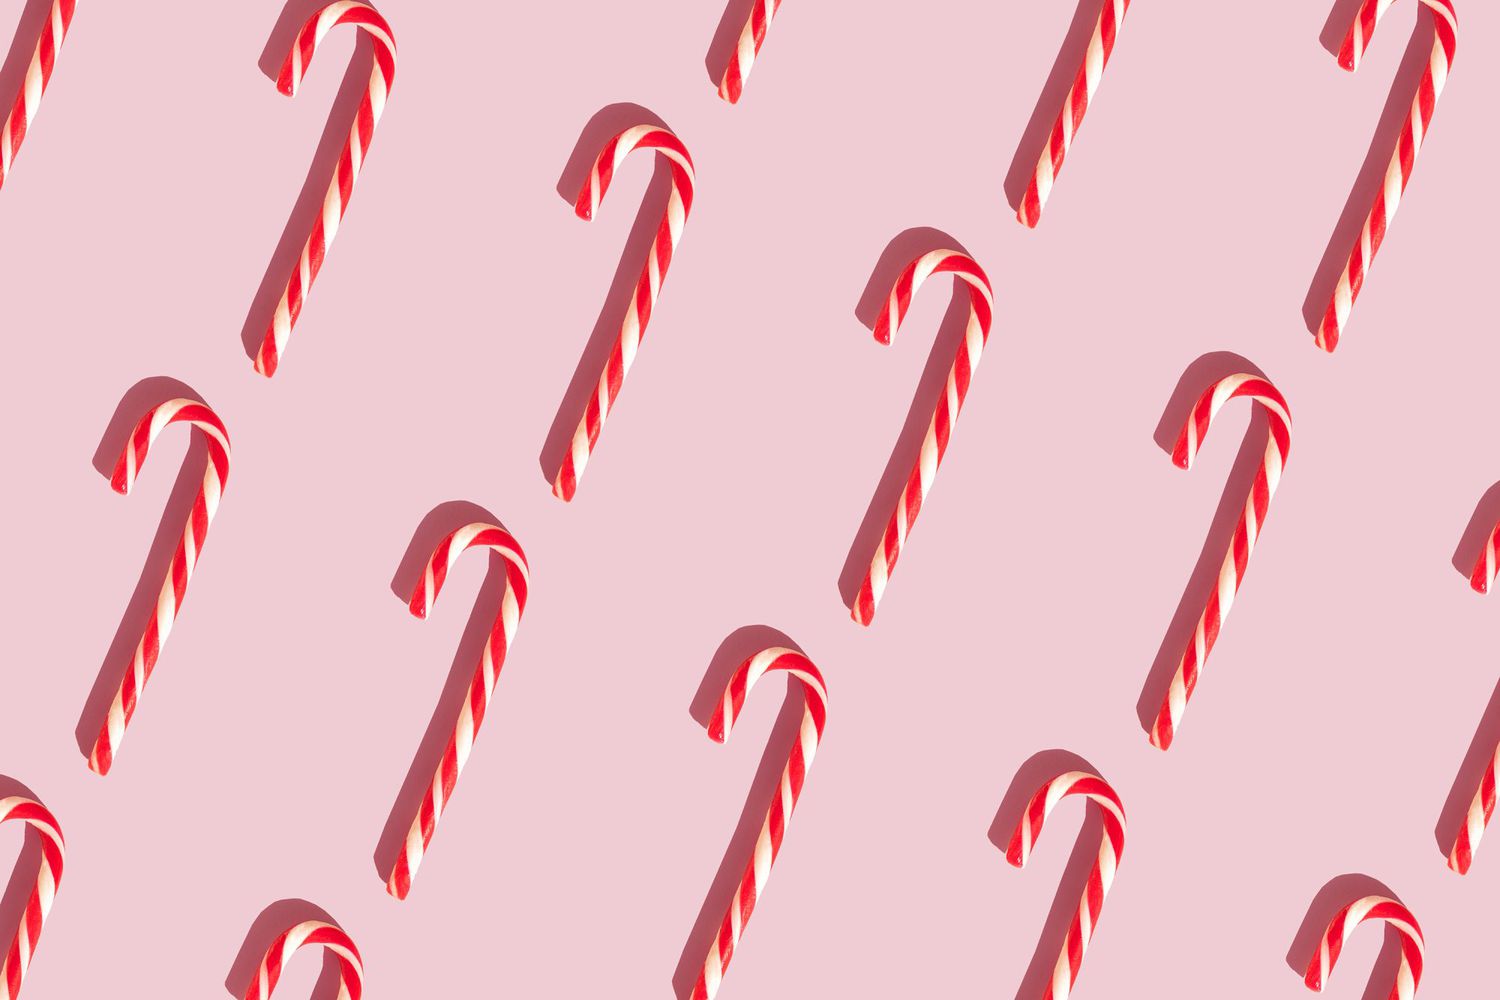 Candy canes on the pink background